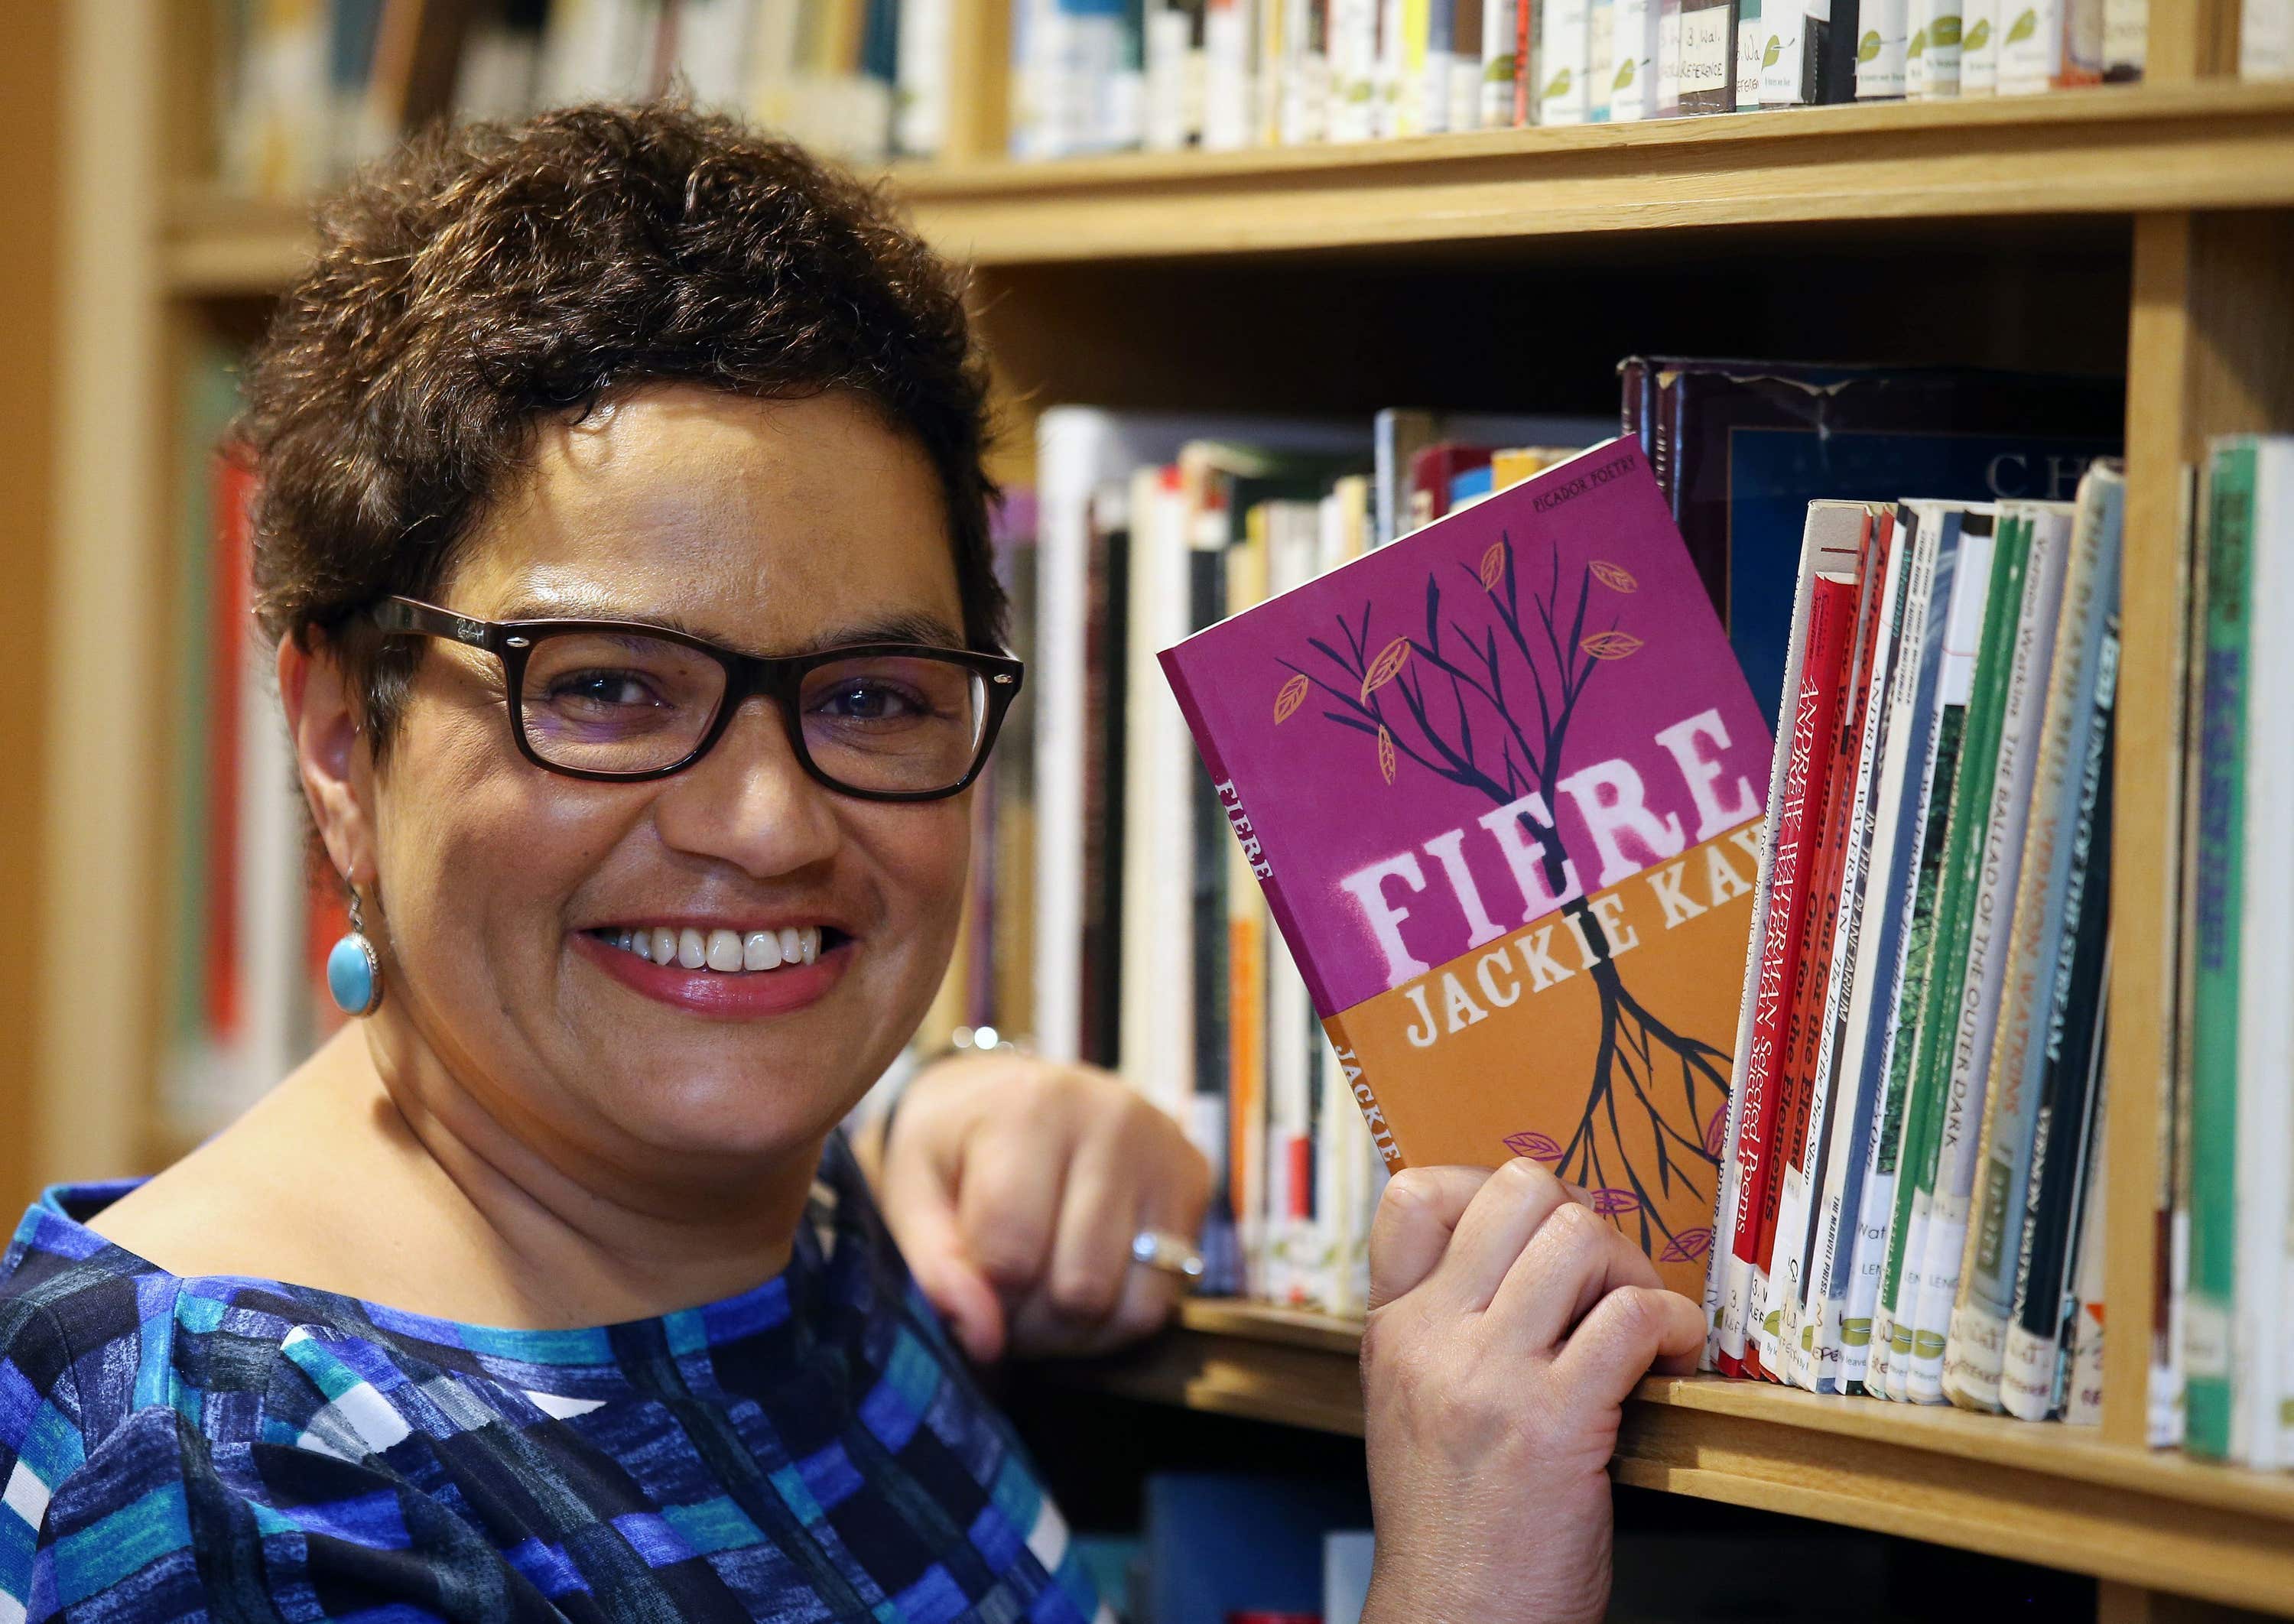 New Makar Jackie Kay will be an interviewer at the book festival.